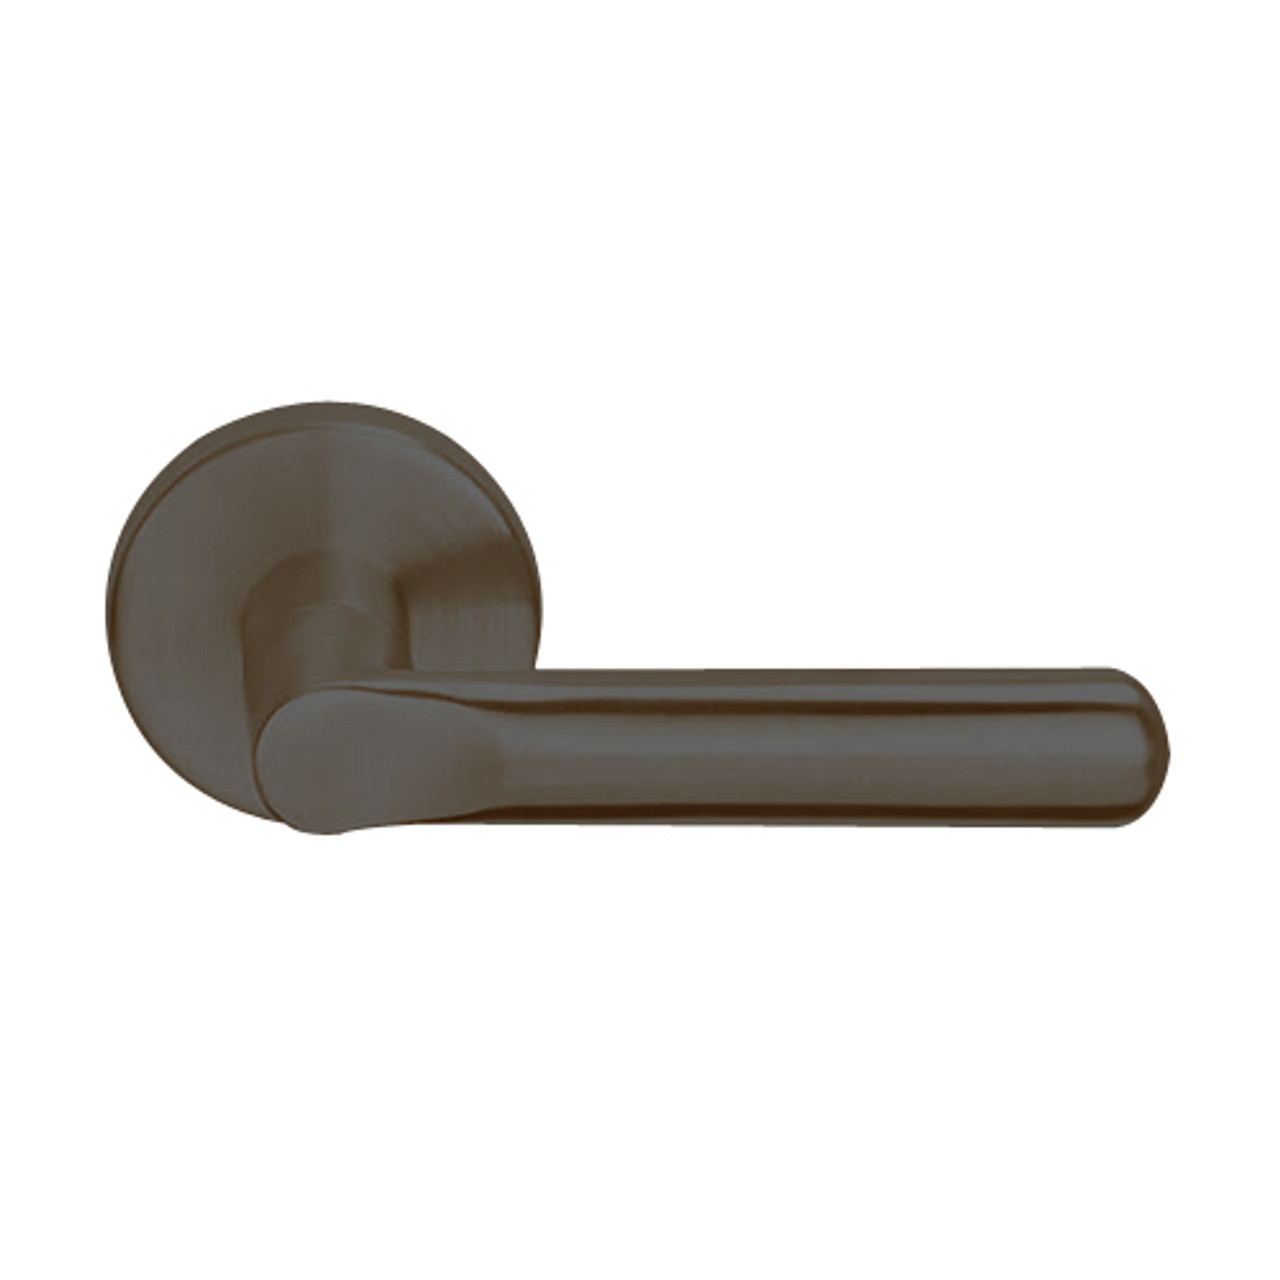 L9050J-18B-613 Schlage L Series Entrance Commercial Mortise Lock with 18 Cast Lever Design Prepped for FSIC in Oil Rubbed Bronze